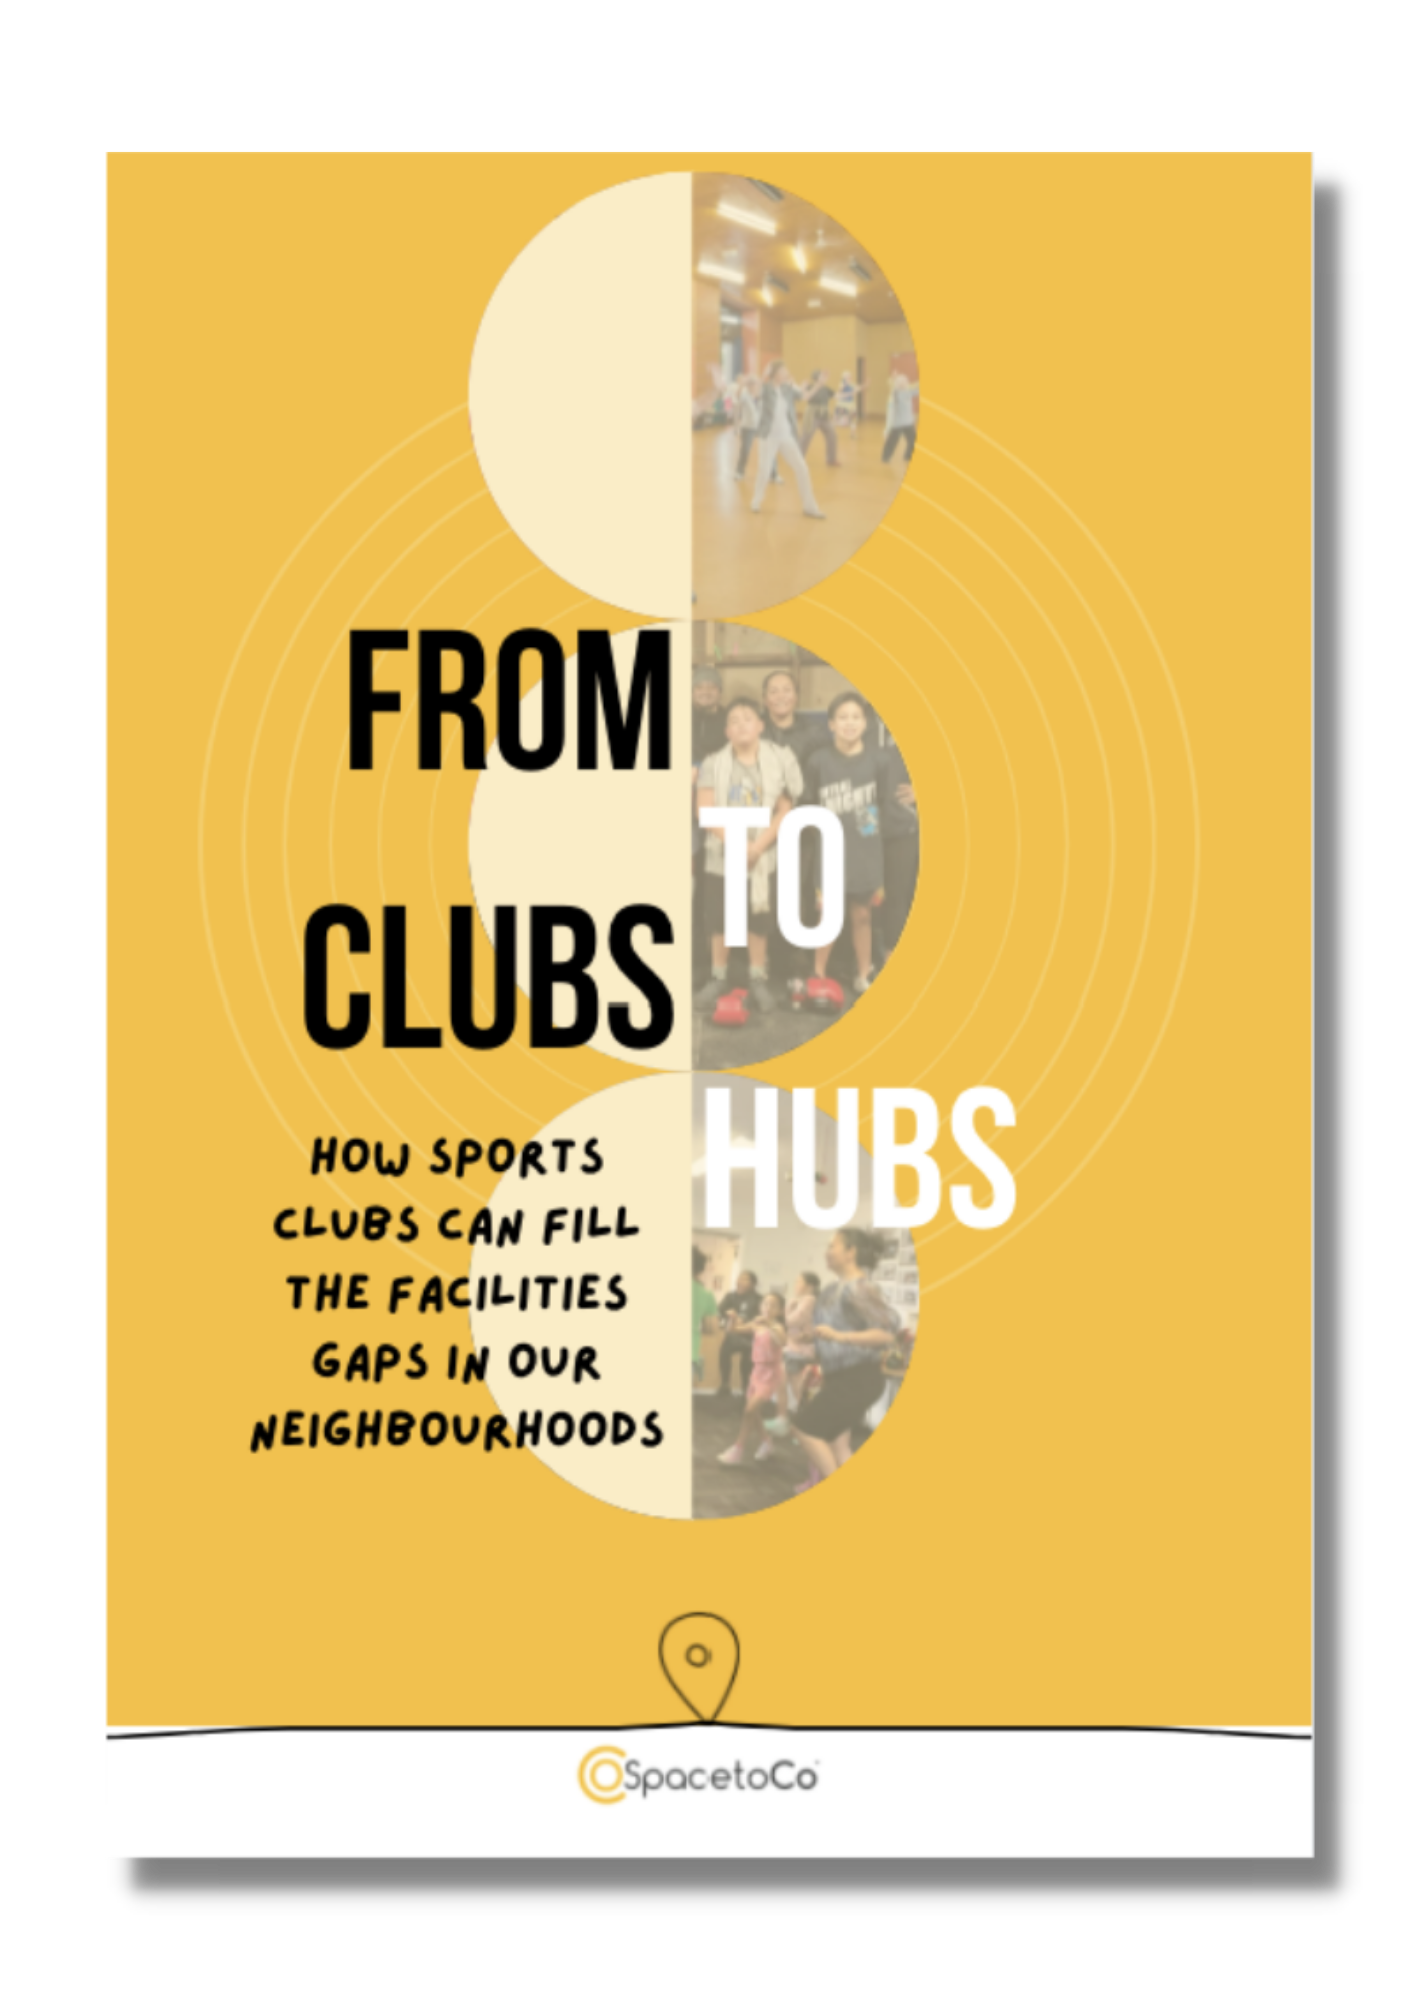 How to turn your sports club into a thriving community hub